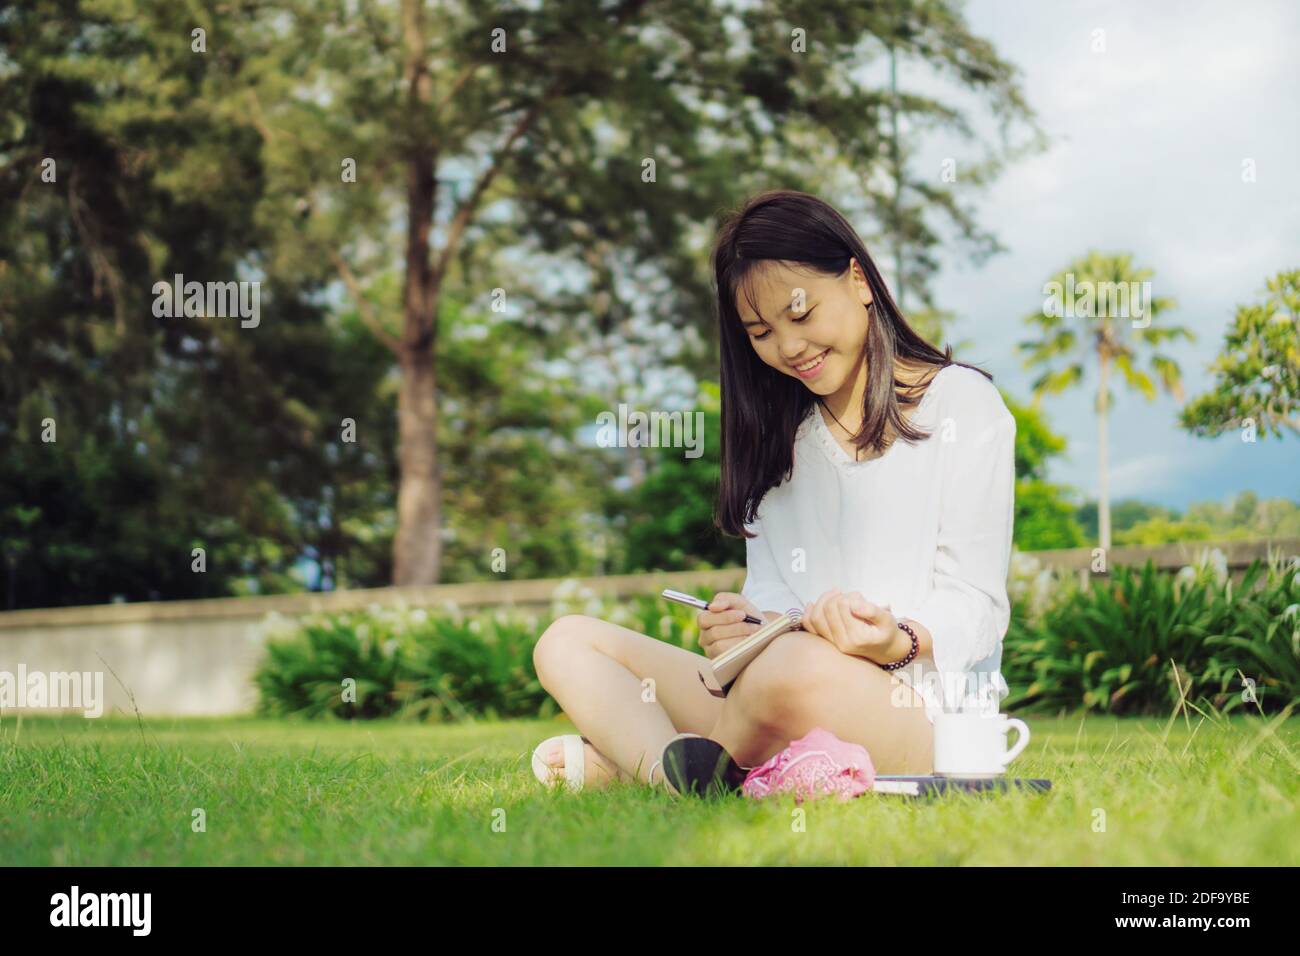 Smiling young Asian woman sitting with legs cross on grass field in a public park while writing on diary. Outdoor lifestyle photography. Stock Photo